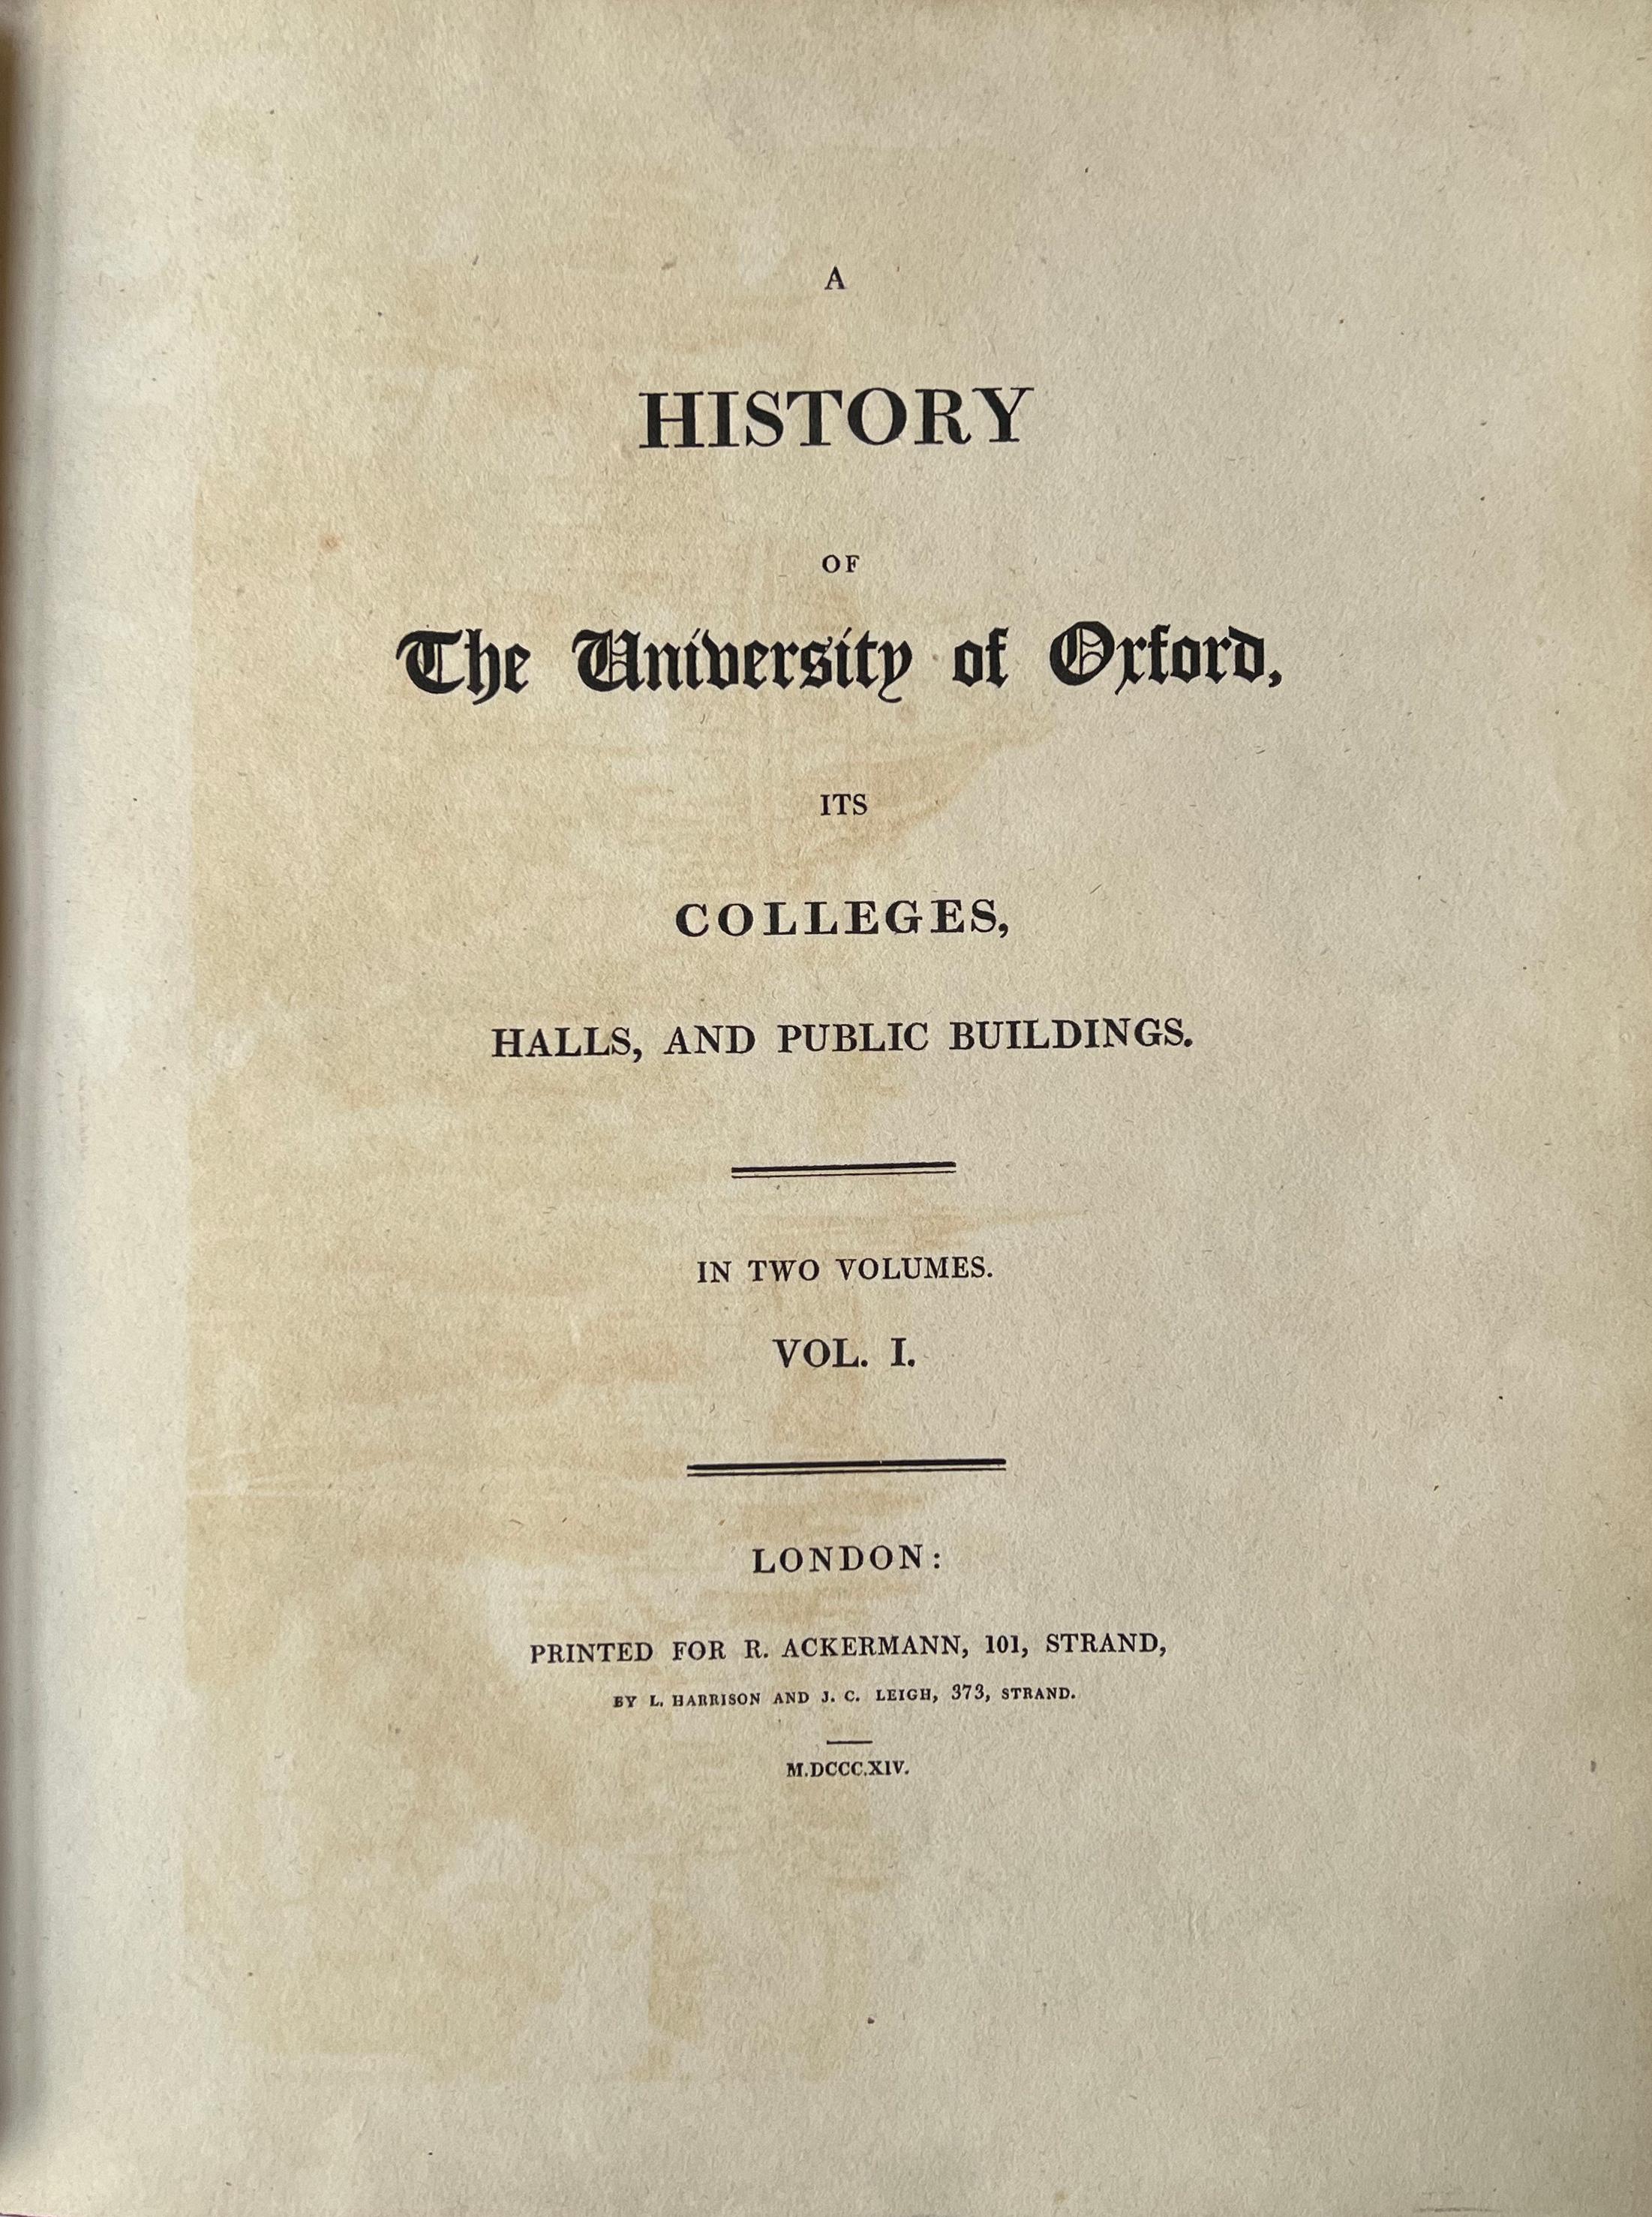 A History of the University of Oxford, its Colleges, Halls und Public Buildings (19. Jahrhundert) im Angebot